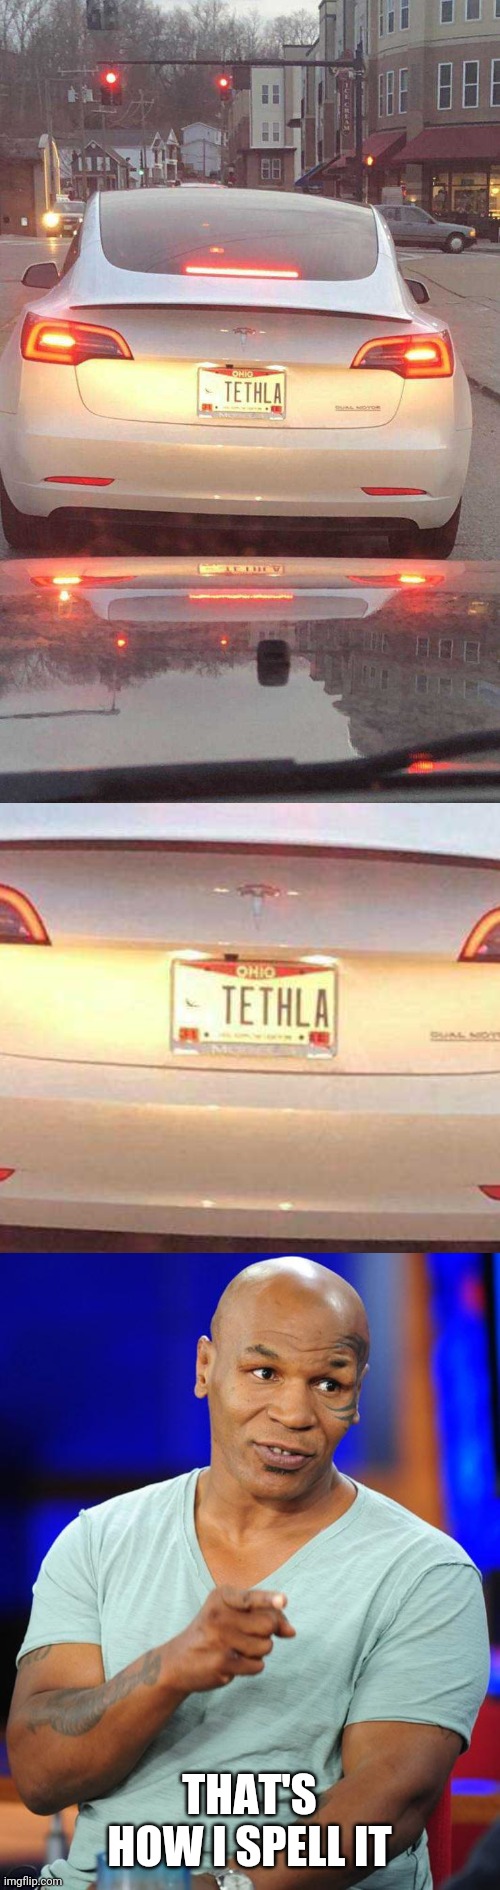 SOUNDS LIKE MIKE TYSON | THAT'S HOW I SPELL IT | image tagged in mike tyson,cars,license plate,tesla | made w/ Imgflip meme maker